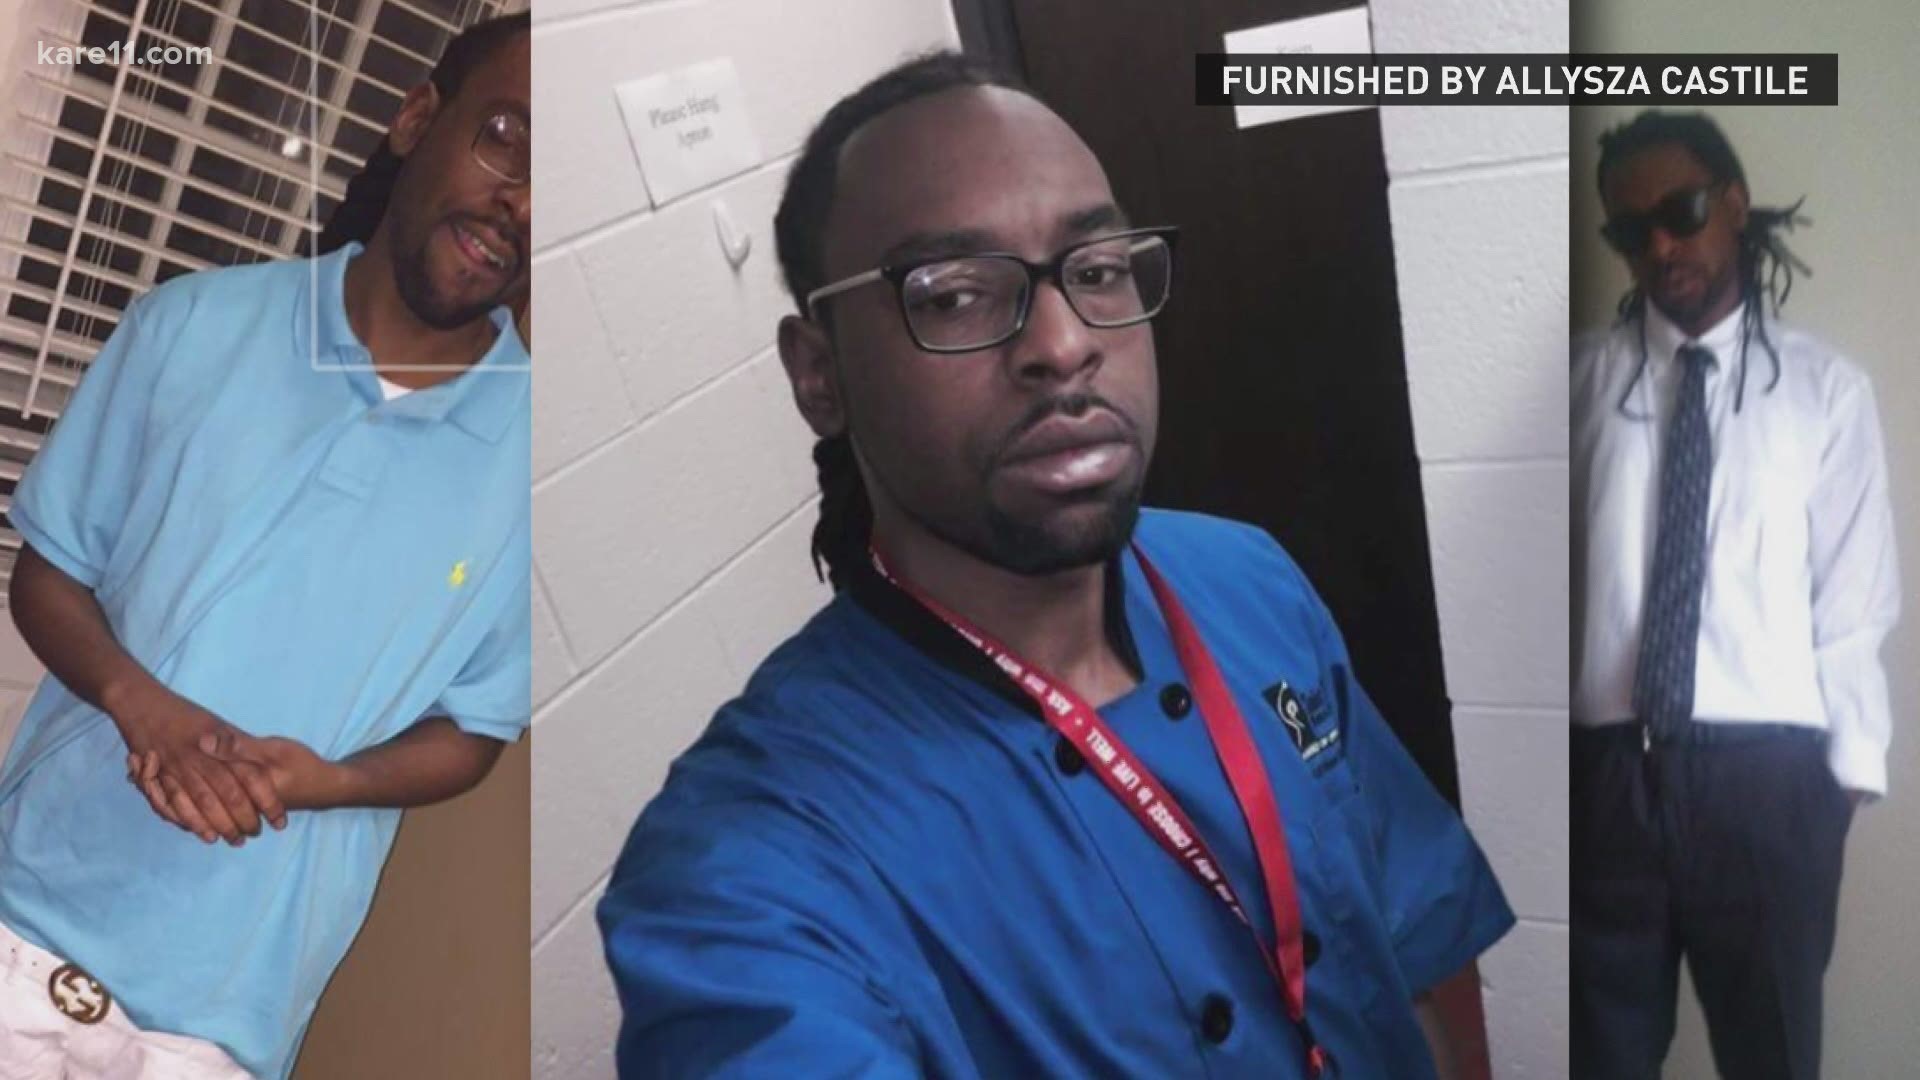 Philando Castile remembered, four years after his death | kare11.com